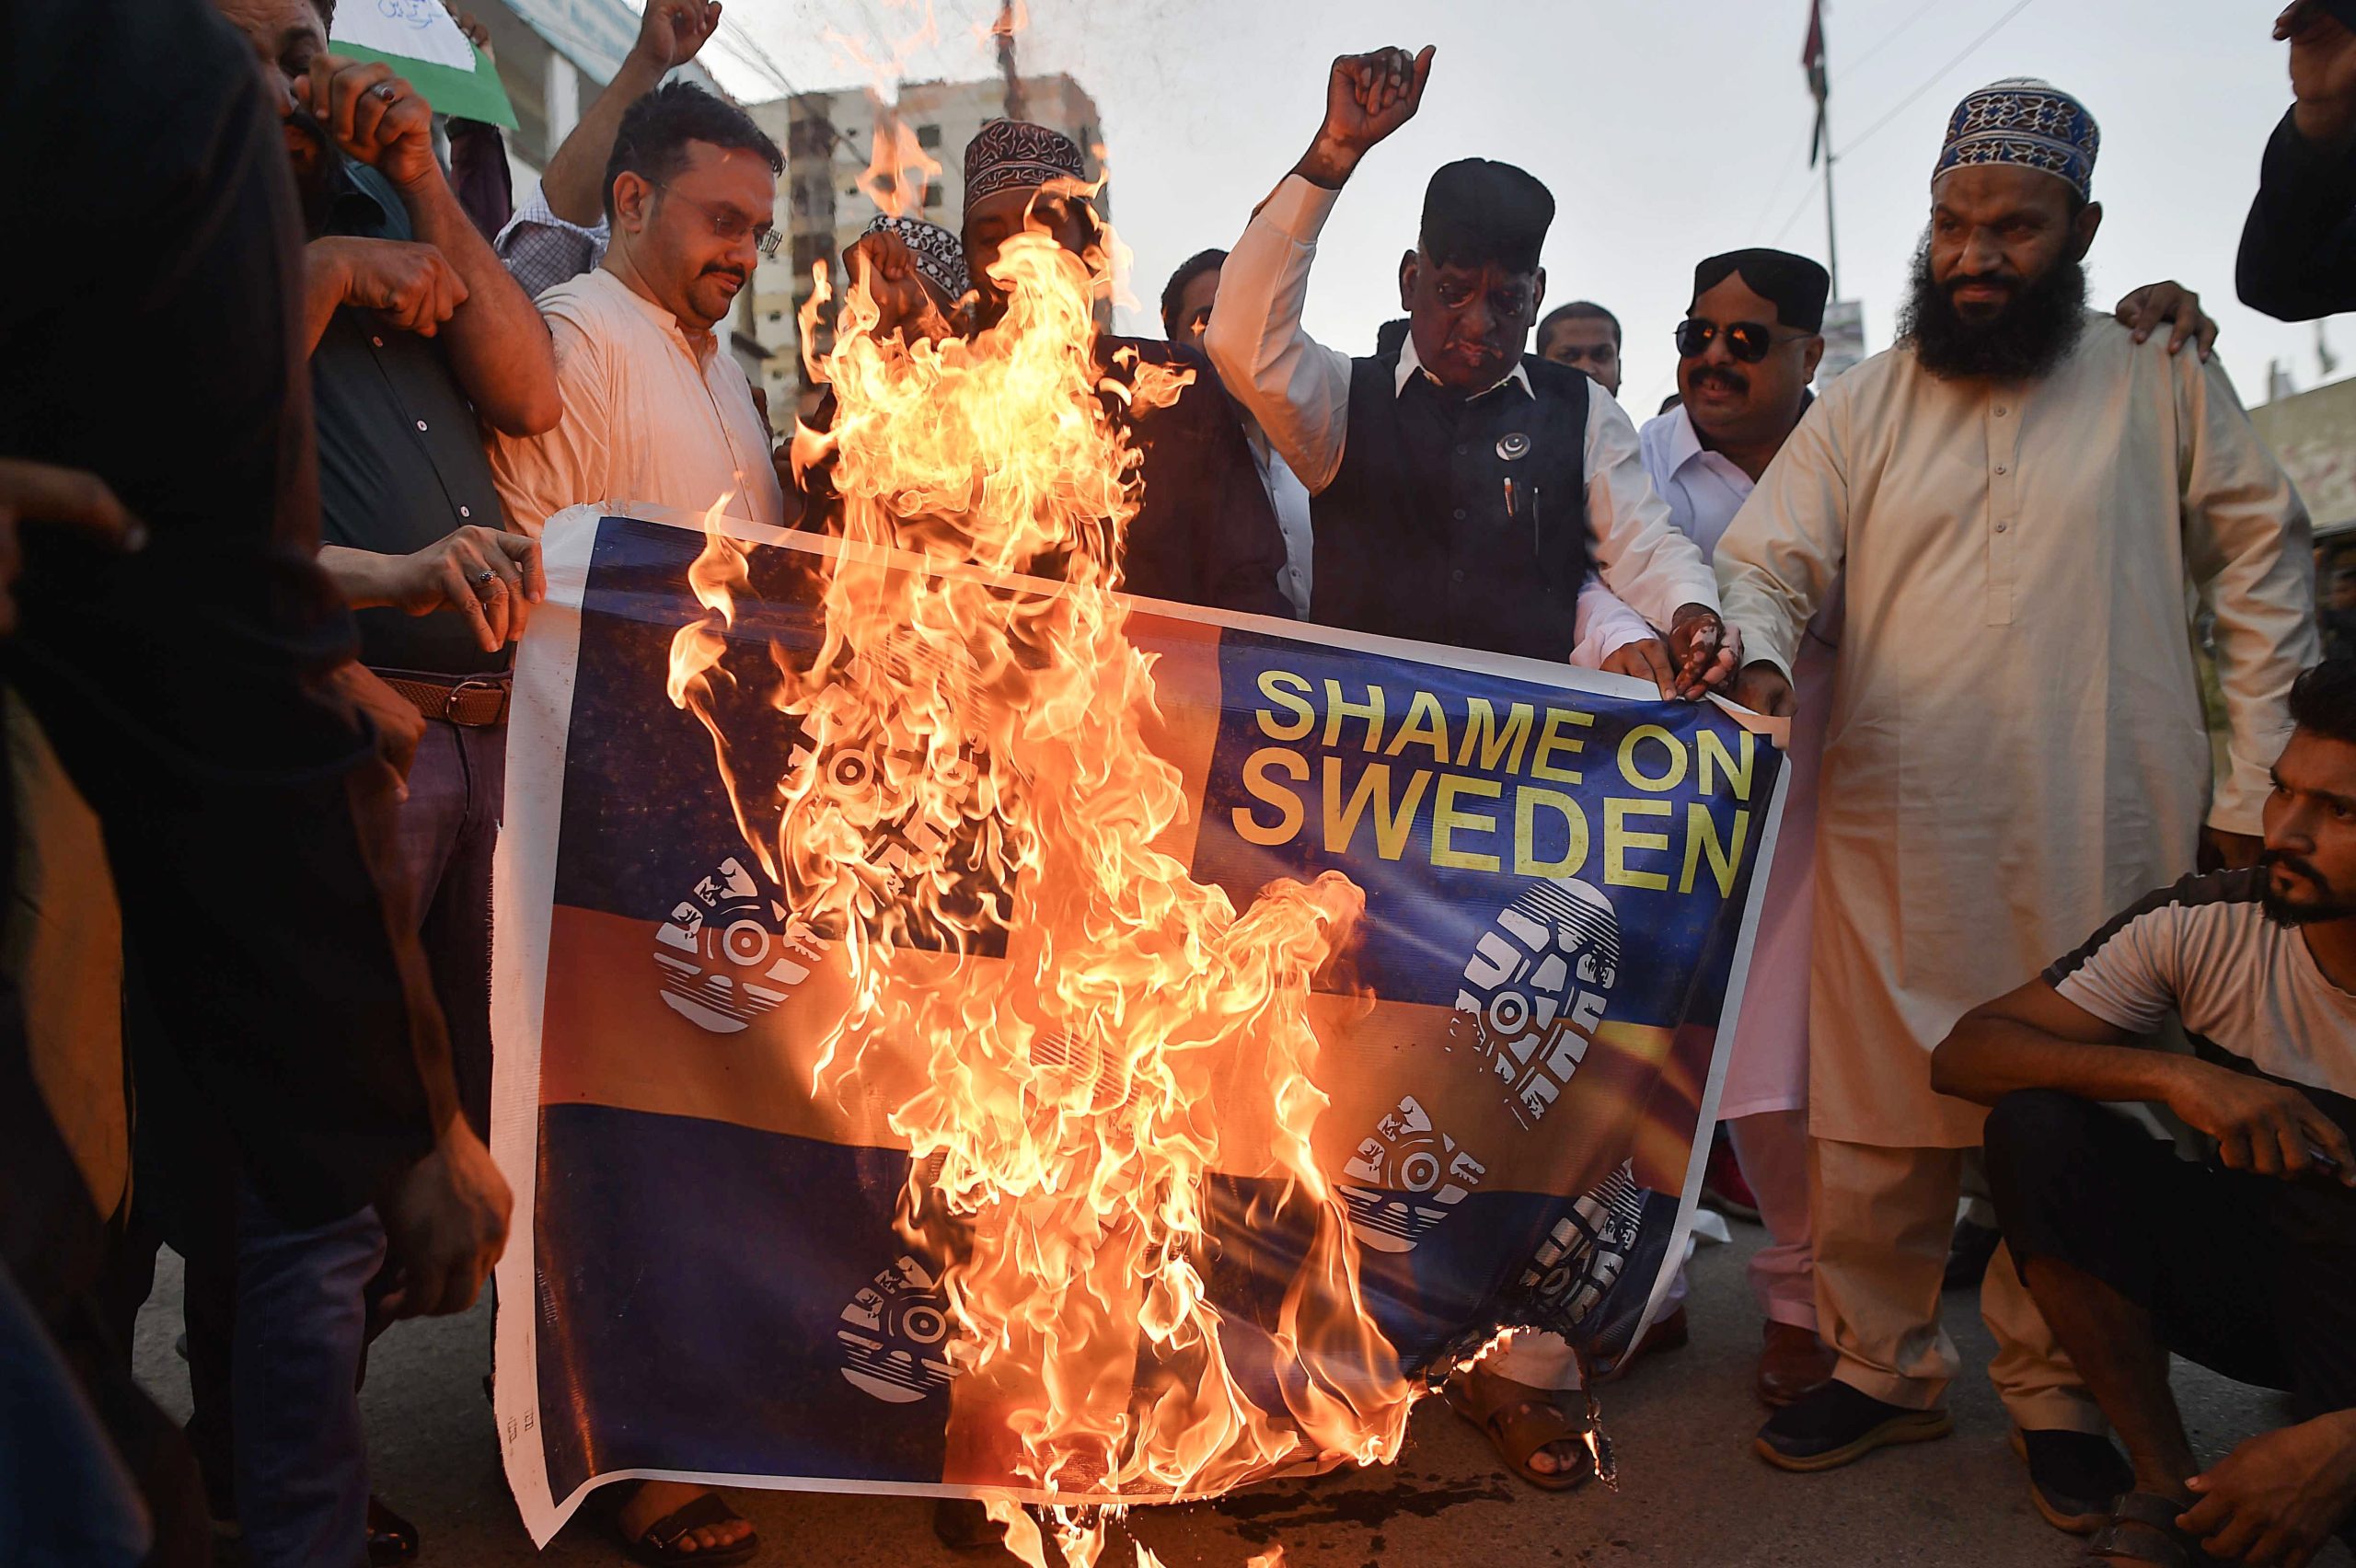 epa10722737 Demonstrators burn a mock Swedish flag as they attend a protest against the burning of a copy of the Koran in Sweden, in Karachi, Pakistan, 02 July 2023. Muslim activists staged protests across Pakistan against Sweden for allowing an Iraqi man to burn a copy of the Koran outside of a mosque in Stockholm.  EPA/SHAHZAIB AKBER